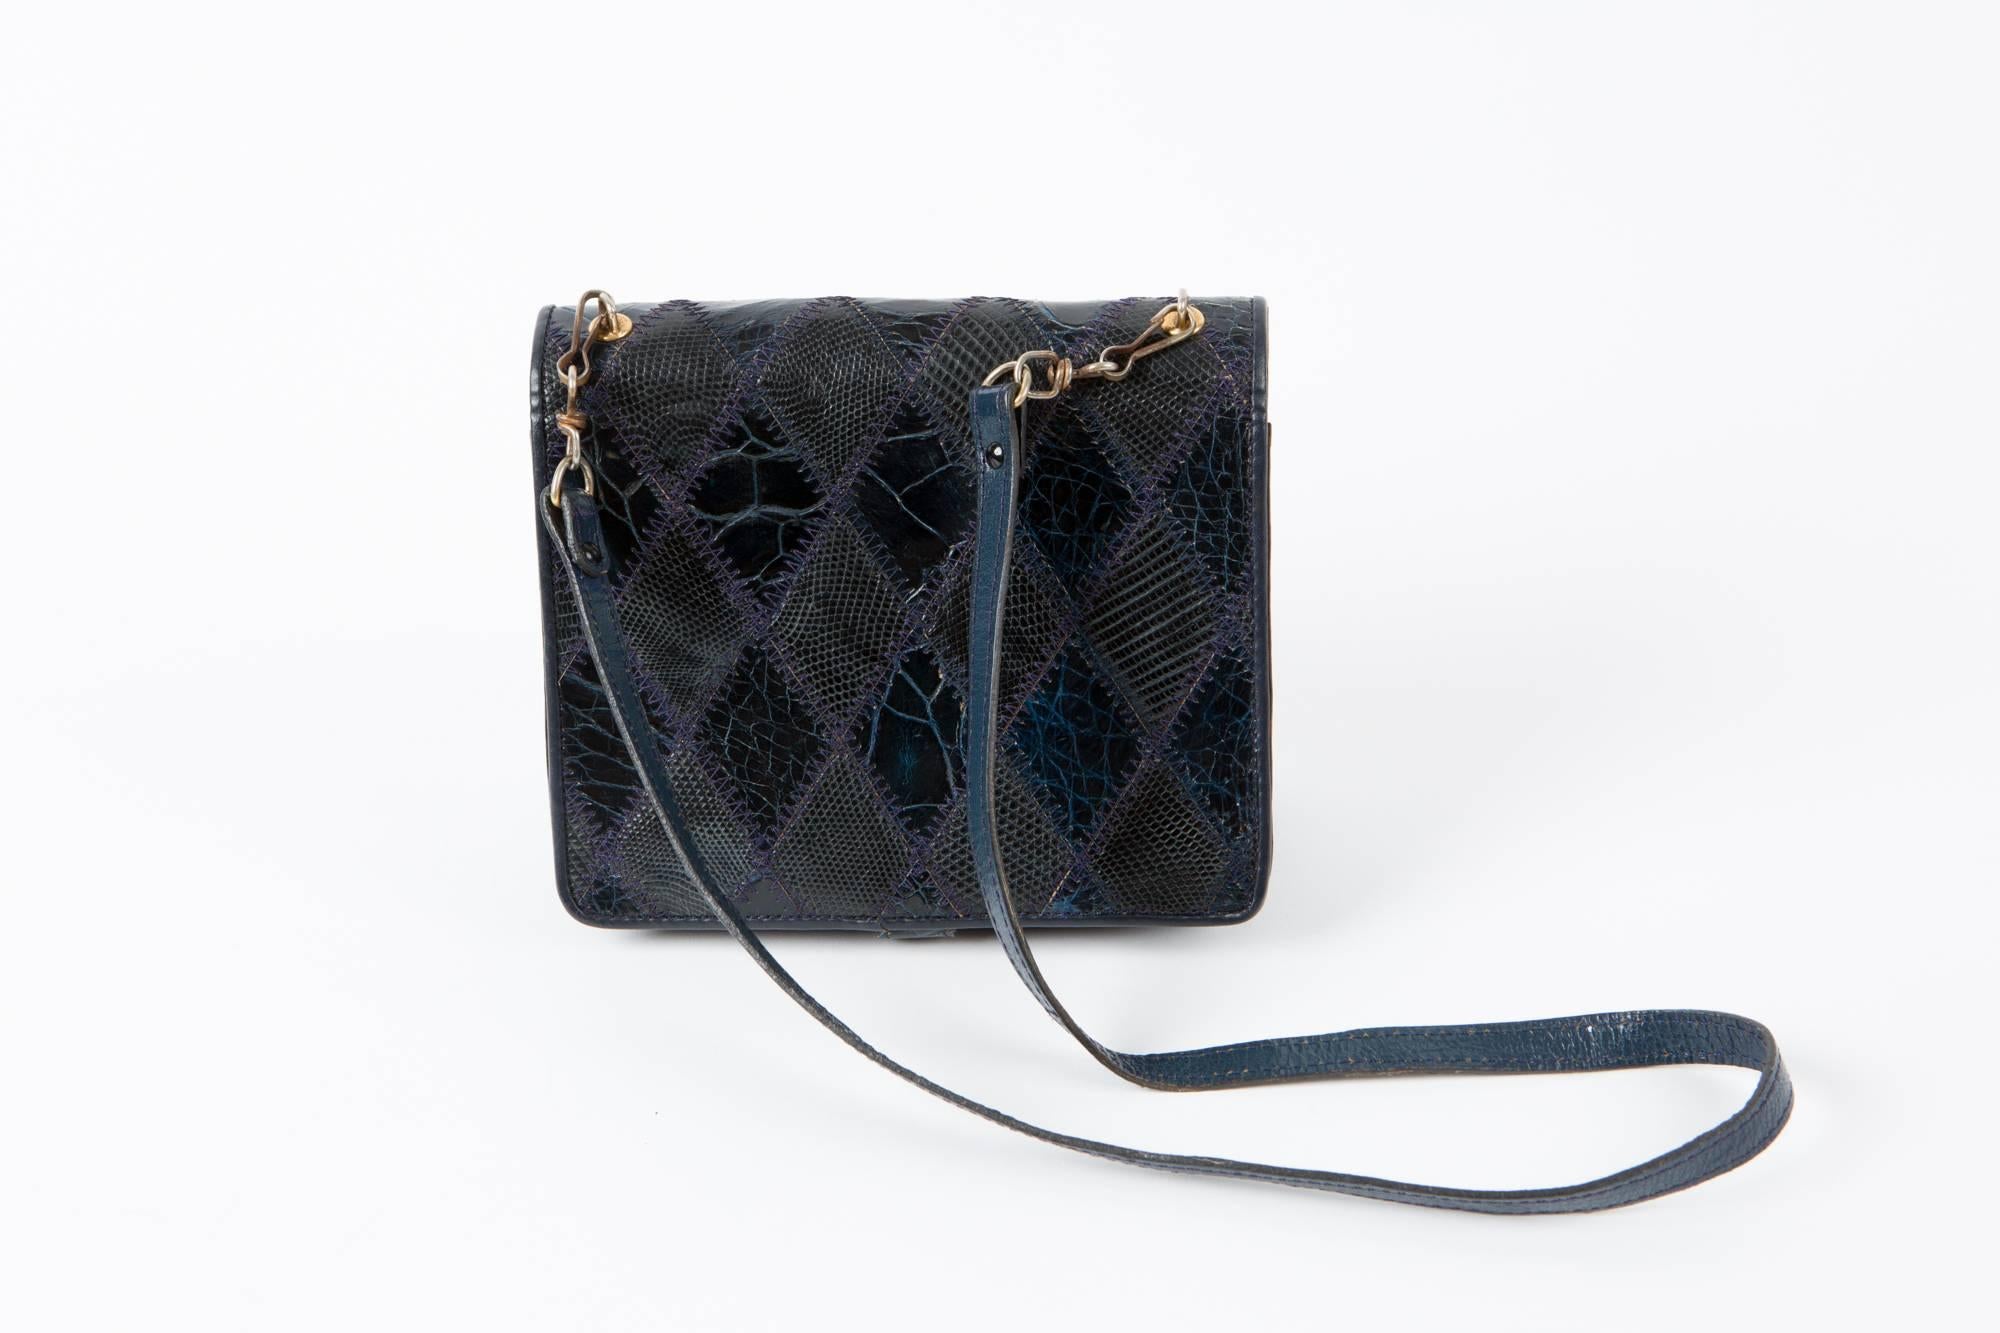 1970s navy leather patches clutch featuring different leather & reptile leather effects, four compartments, gold tone metallic opening, a detachable shoulder strap (31,1in. (79cm)).
6,7 in. (17cm) X 5.9in. (15cm) X 1.18in. (3cm) 
In good vintage